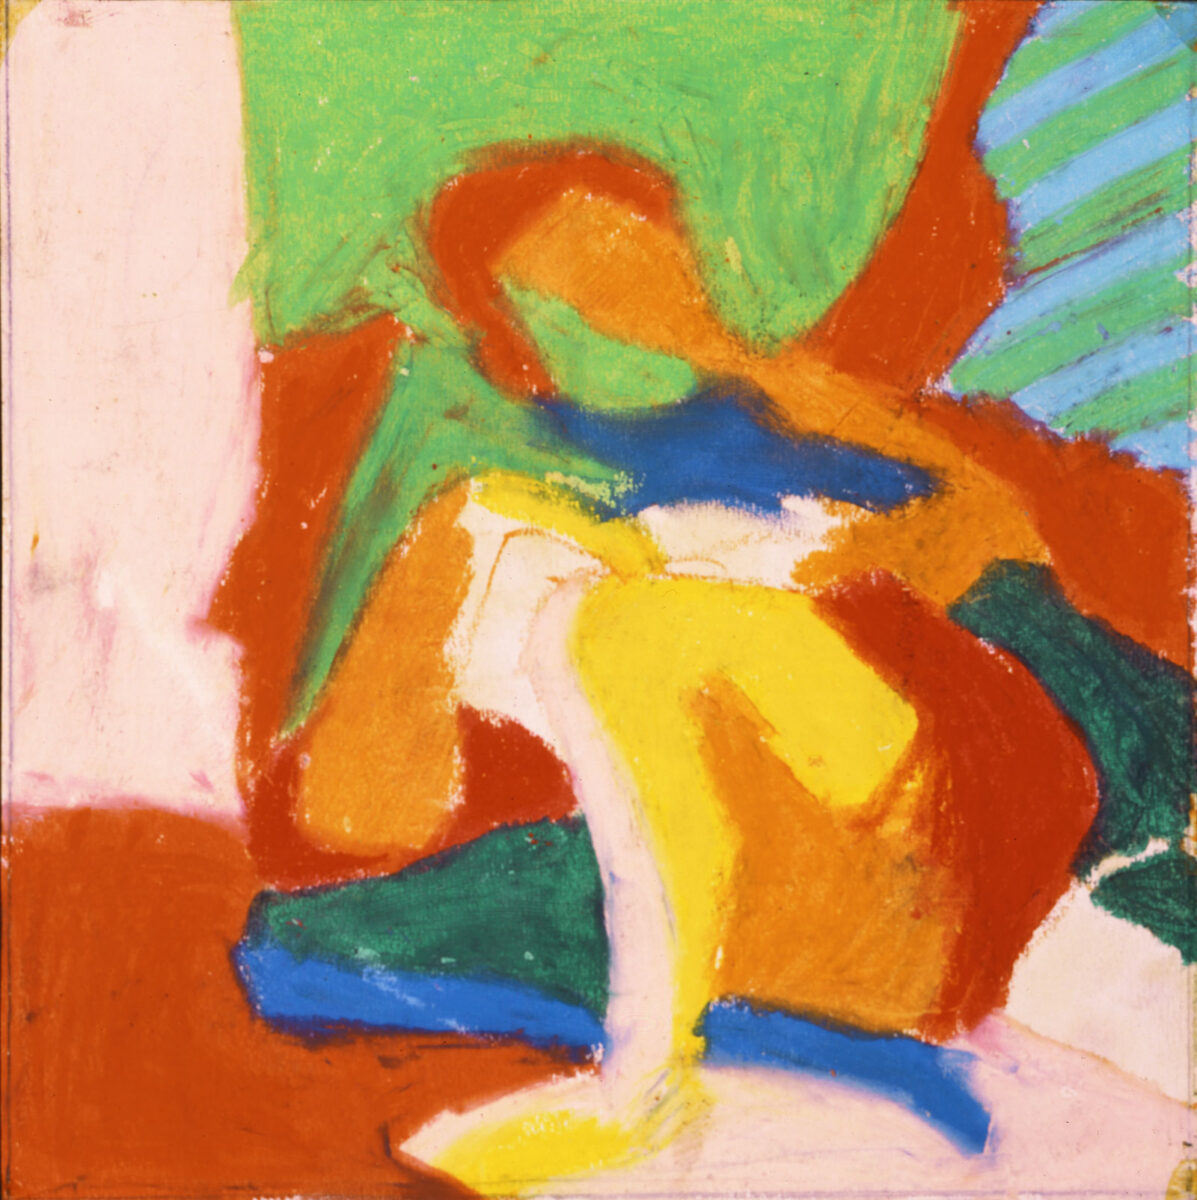 Sean Scully, «Untitled (Seated Figure)», 1966-1967. Λαδοπαστέλ σε χαρτί, 20,7x20,4 εκ.